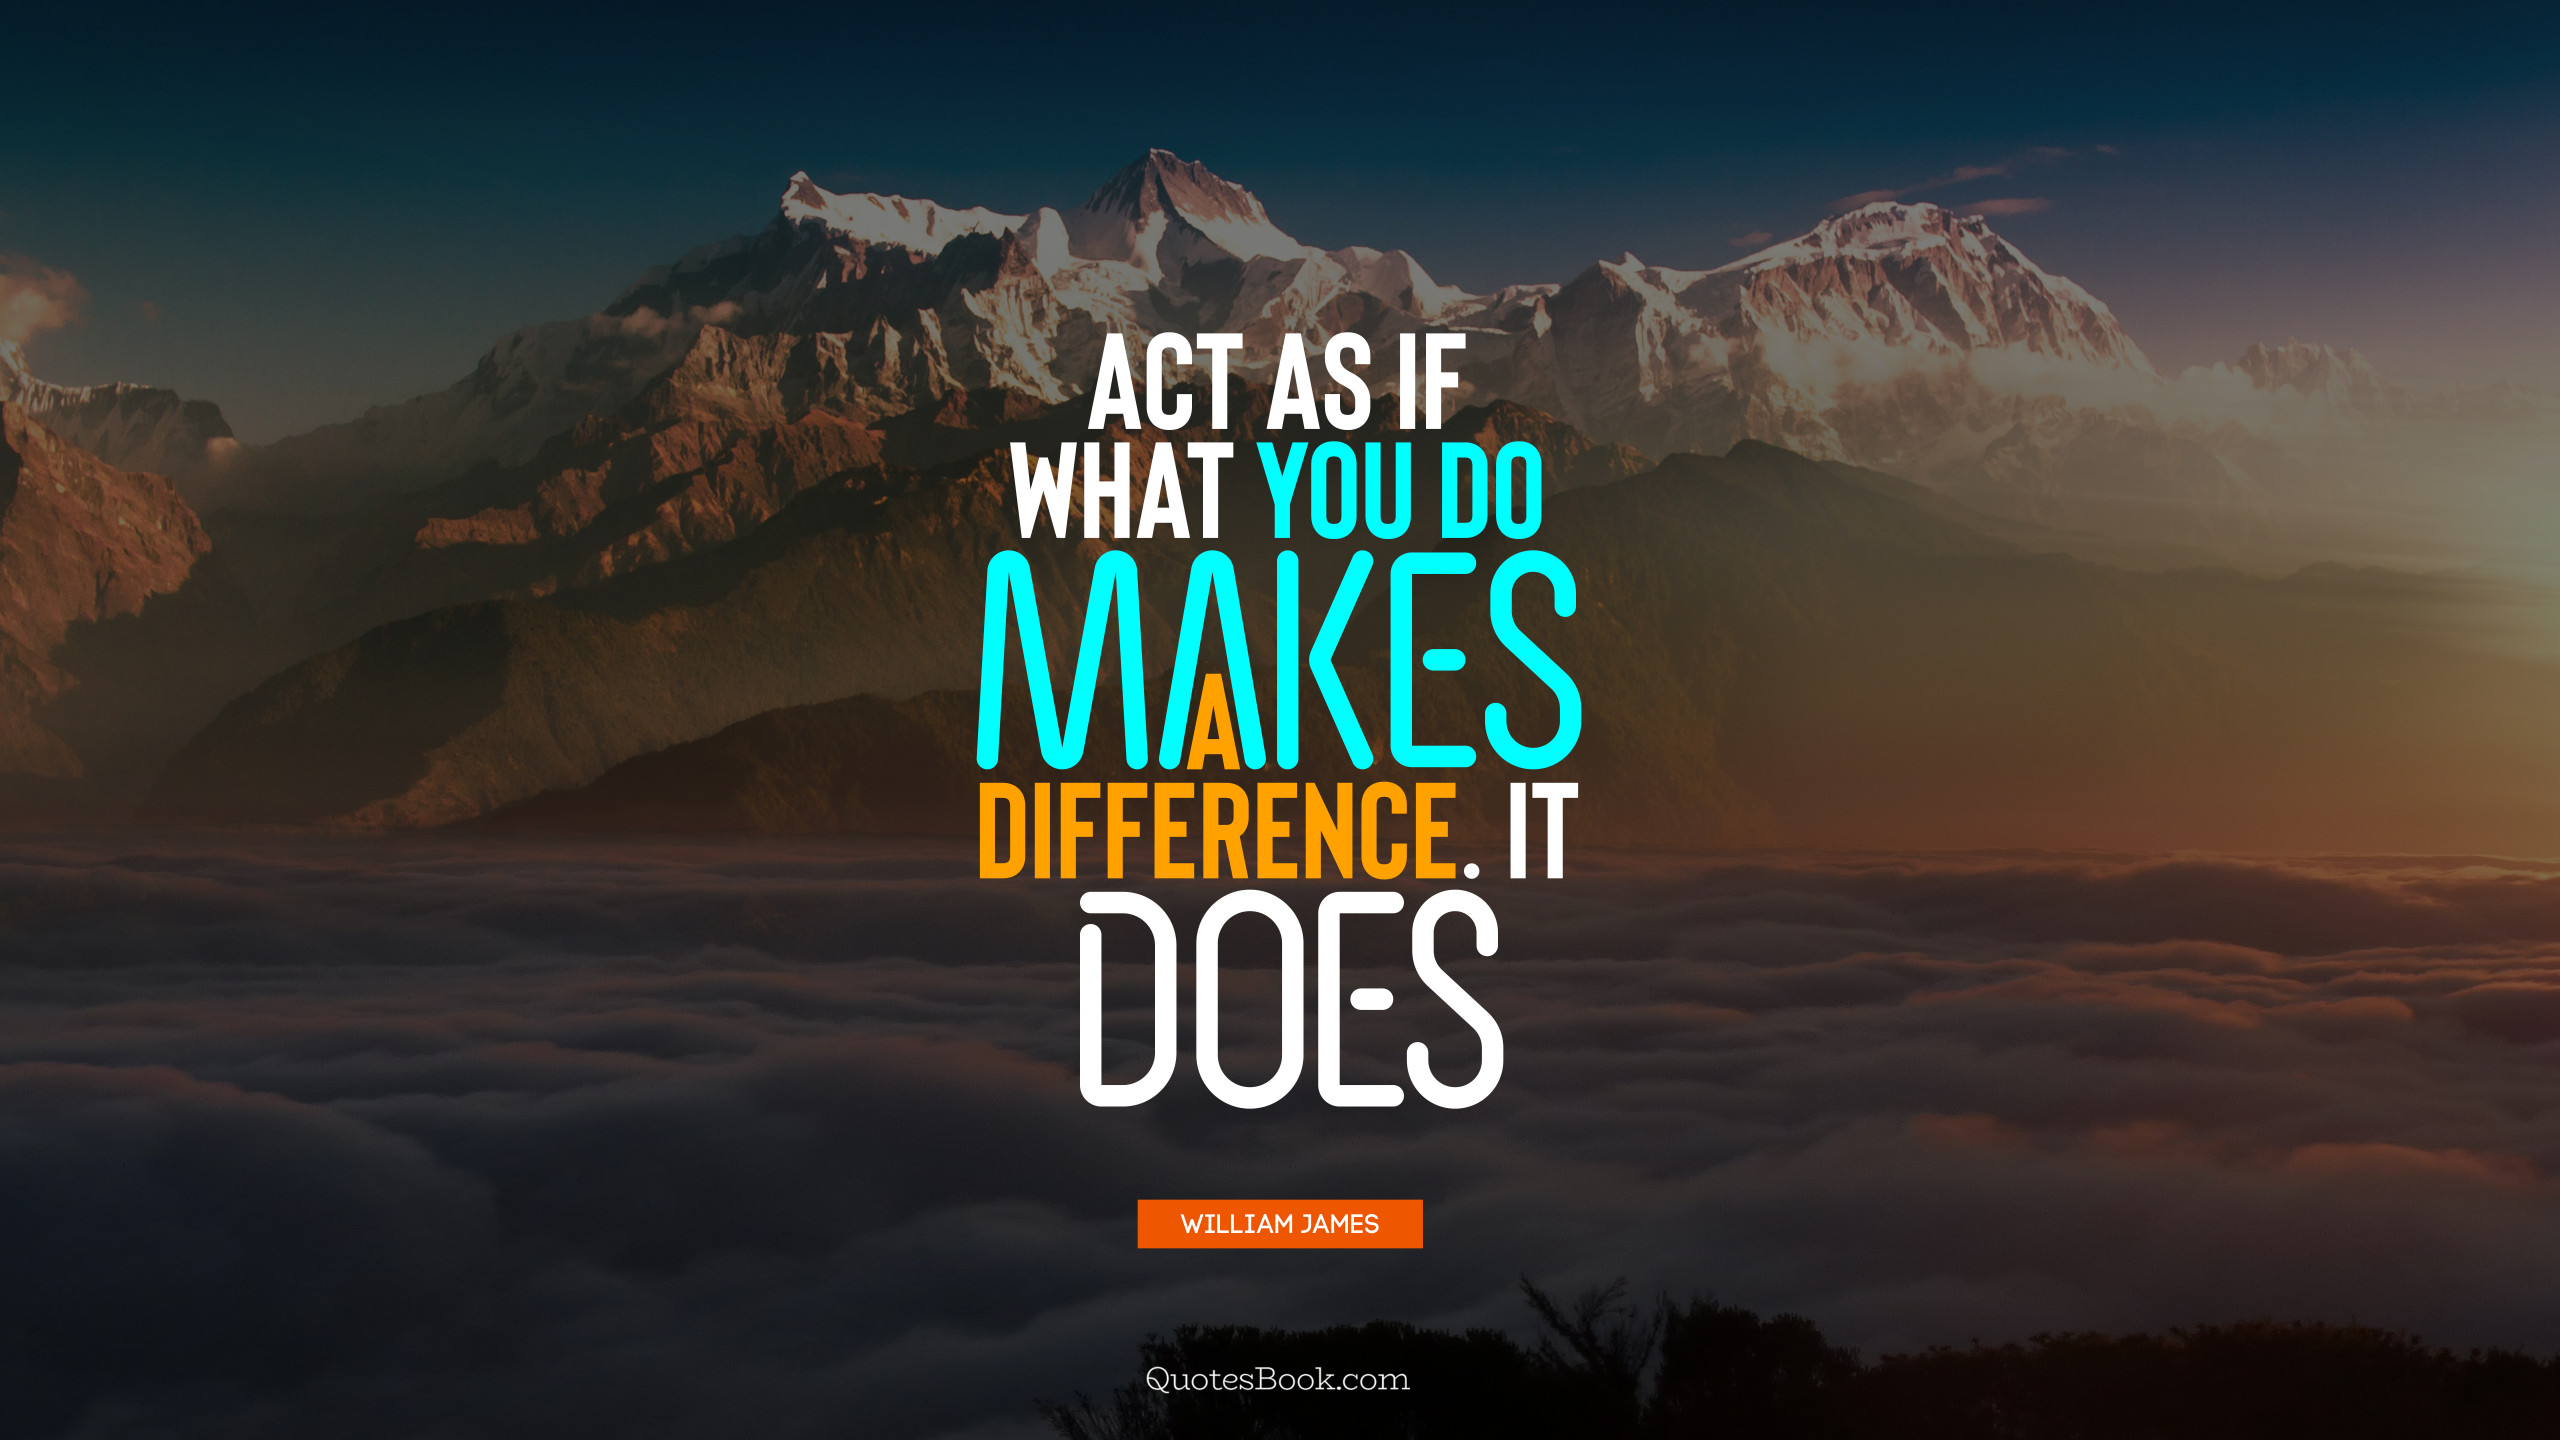 Act as if what you do makes a difference. It does. - Quote by William